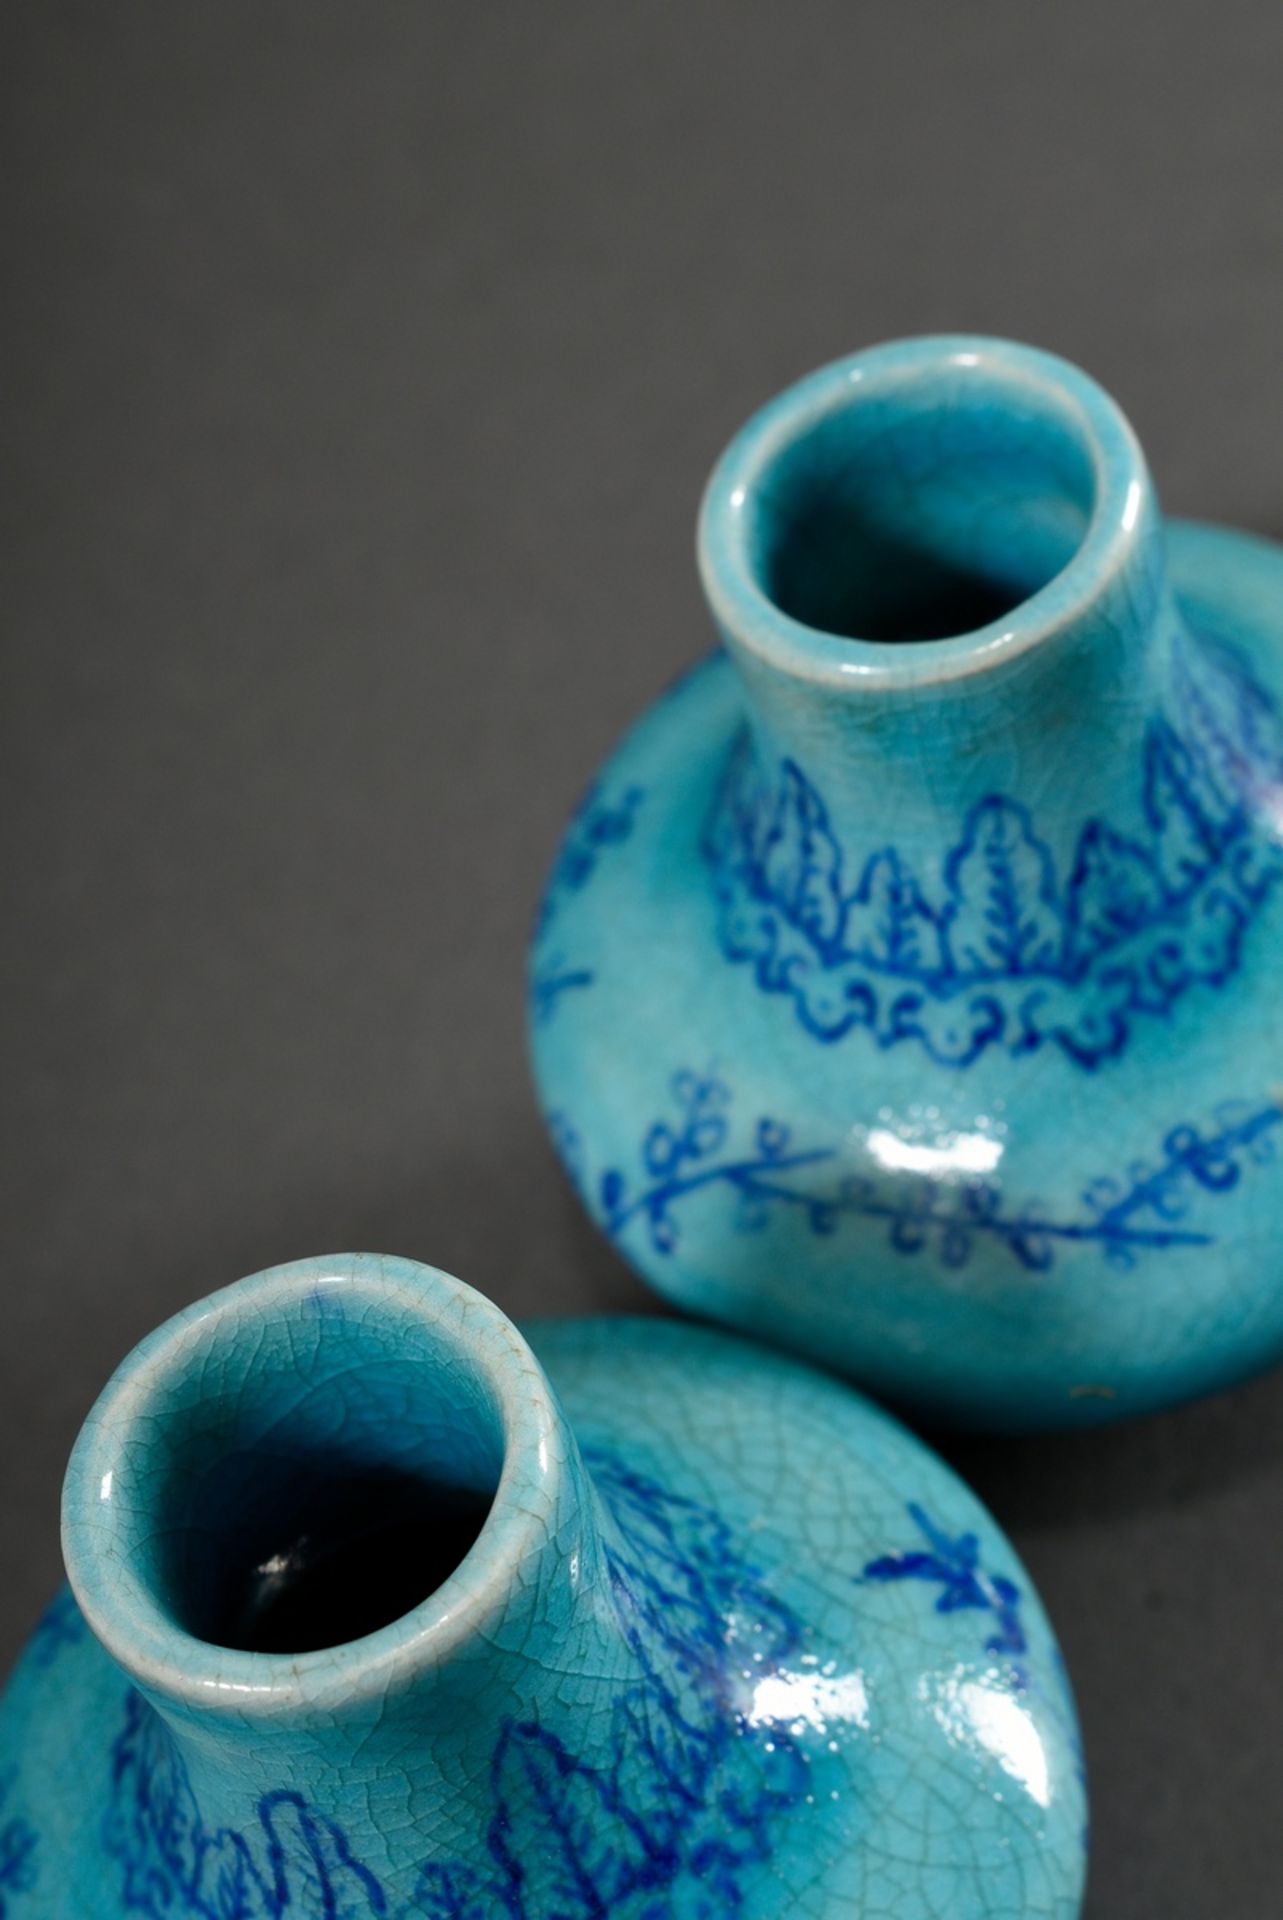 Pair of miniature porcelain vases with blue painting on turquoise crackle glaze "Blossoming Plum Tr - Image 3 of 7